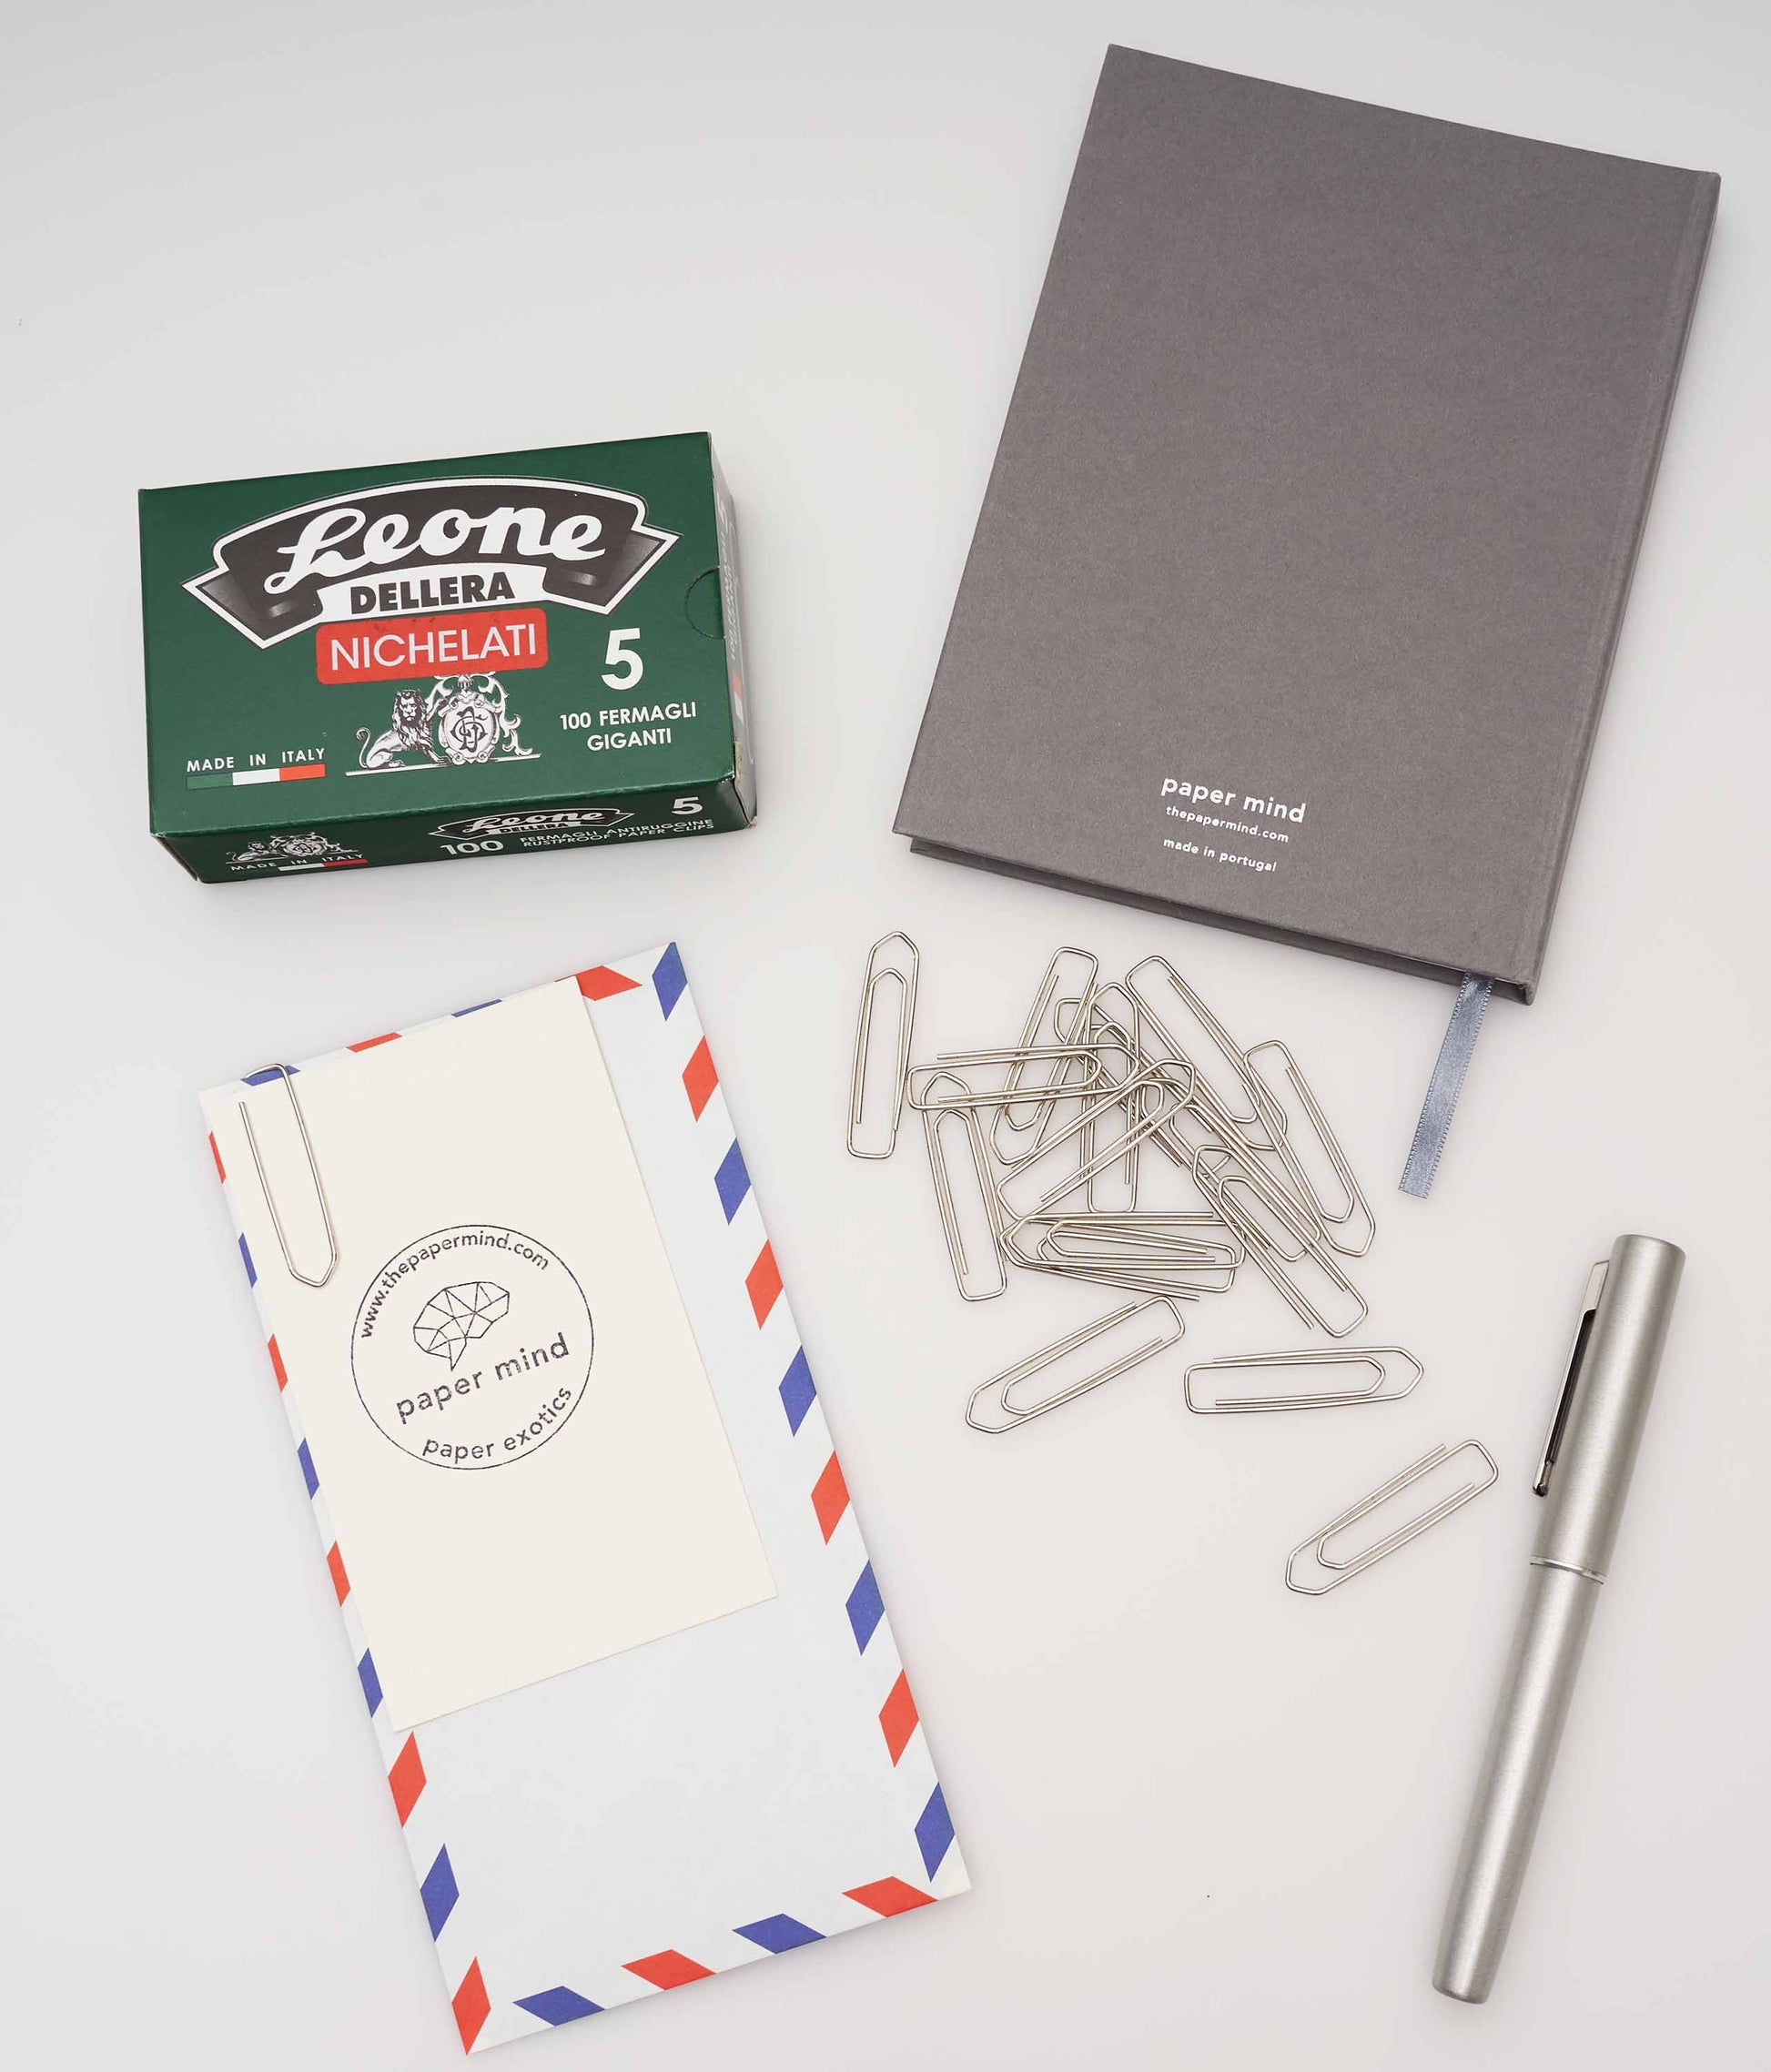 Leone dell'era paper clips. paper clips made in italy size 5 green box with the paper mind blocker hardcover notebook, Lamy aion fountain pen and life airmail envelope